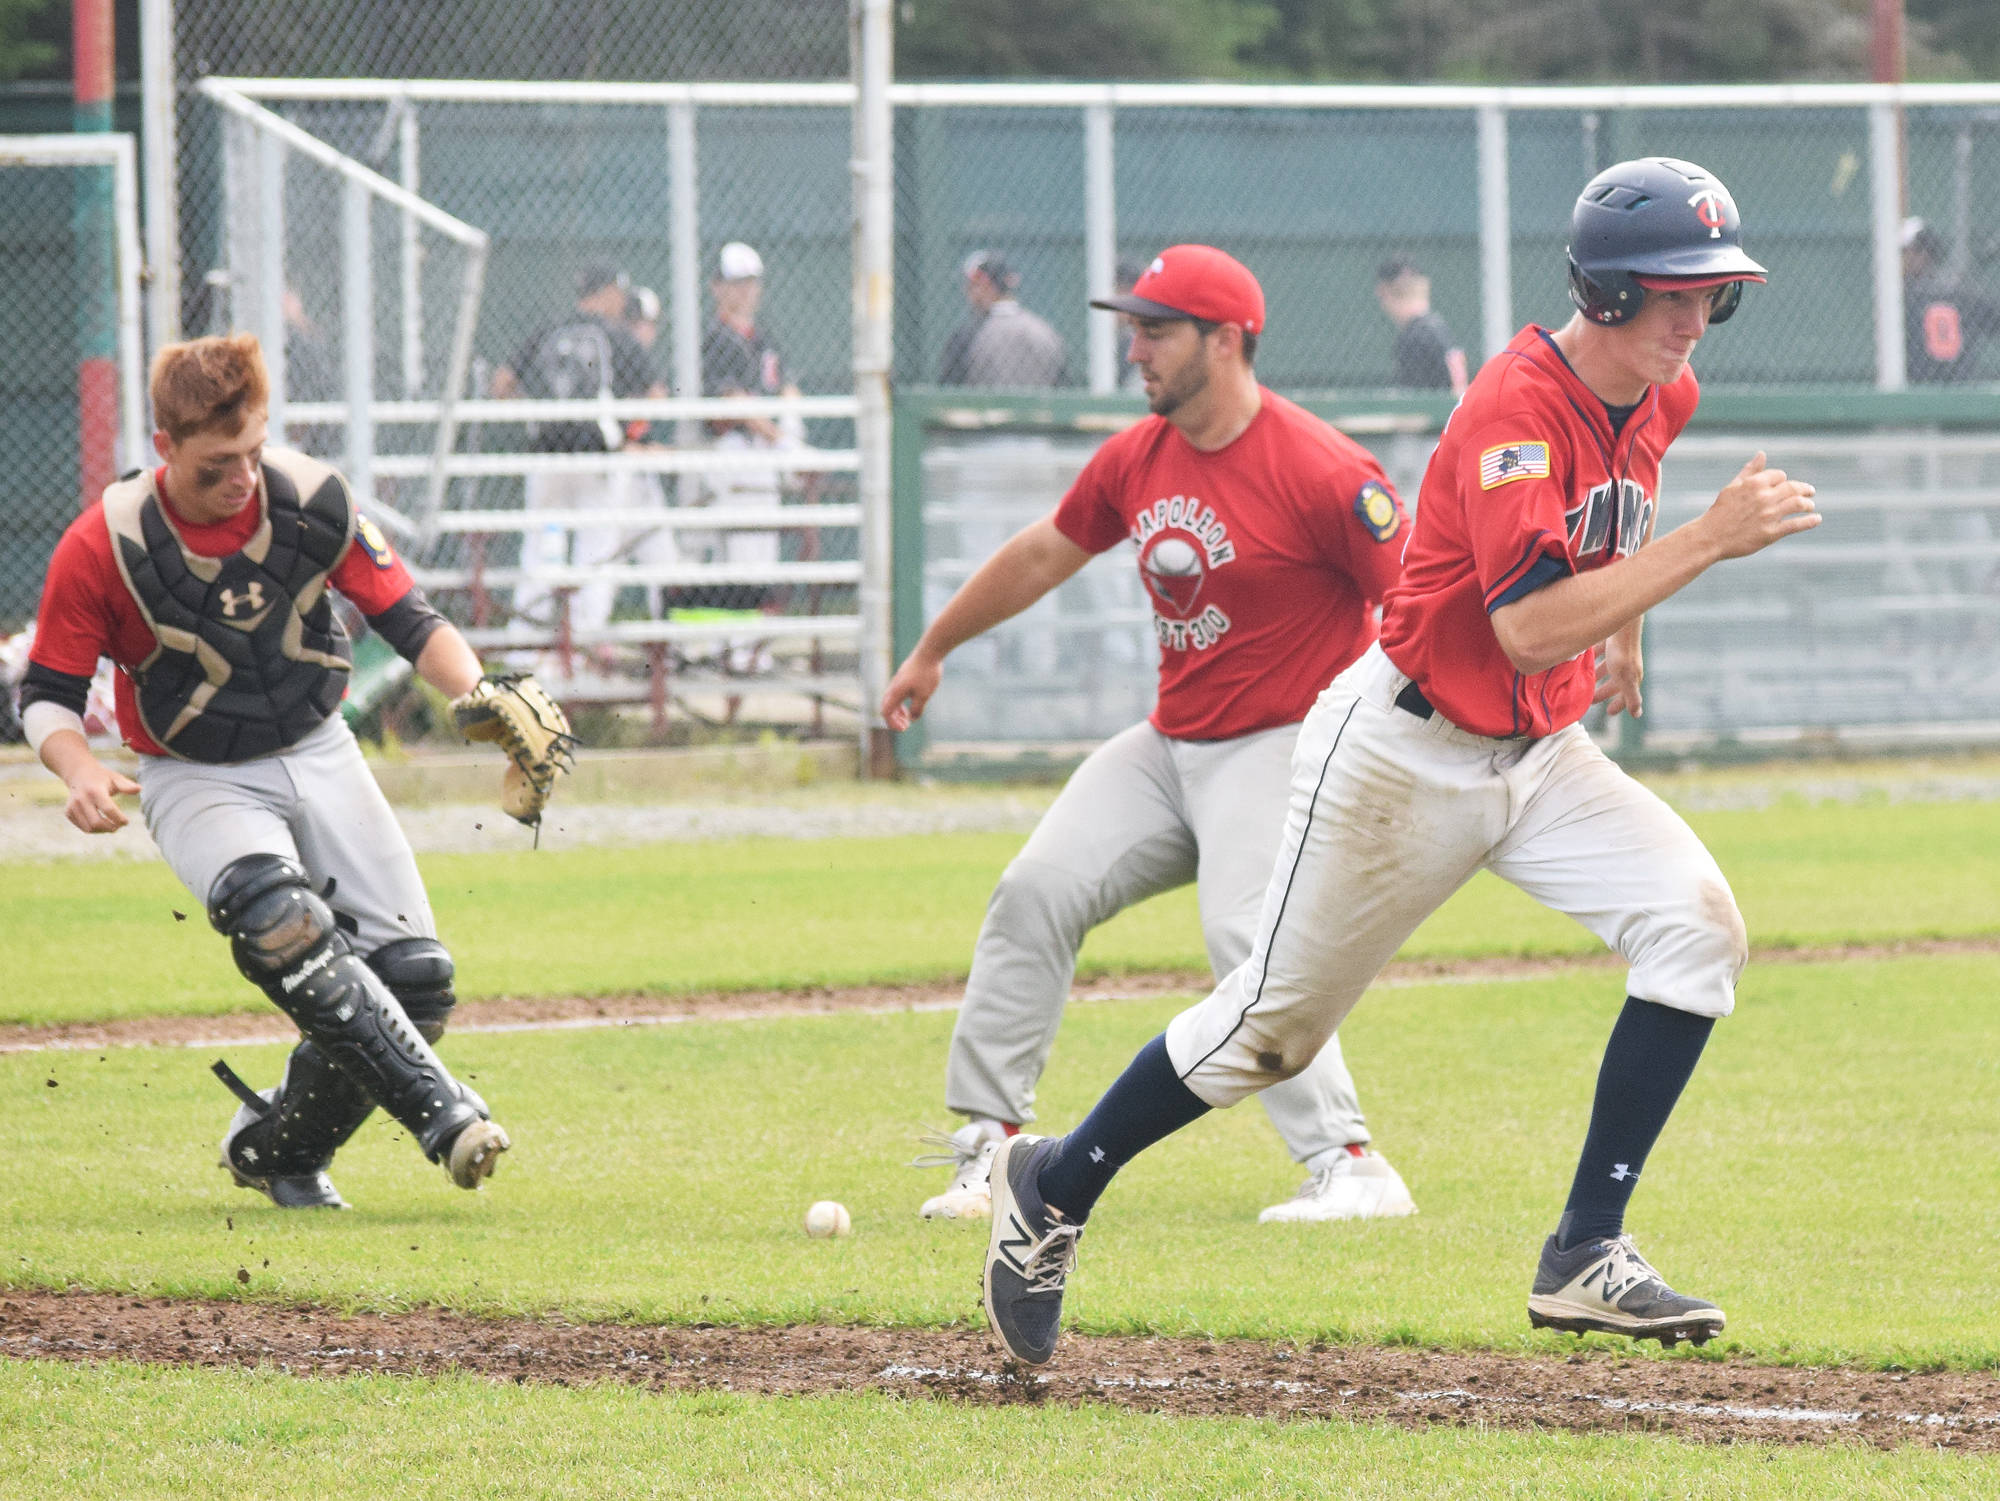 Post 20 Twins catcher Cody Quelland races to beat out a bunt hit against Napoleon, Ohio, Wednesday at the Bill Miller Wood Bat Tournament at Coral Seymour Memorial Ballpark in Kenai. (Photo by Joey Klecka/Peninsula Clarion)